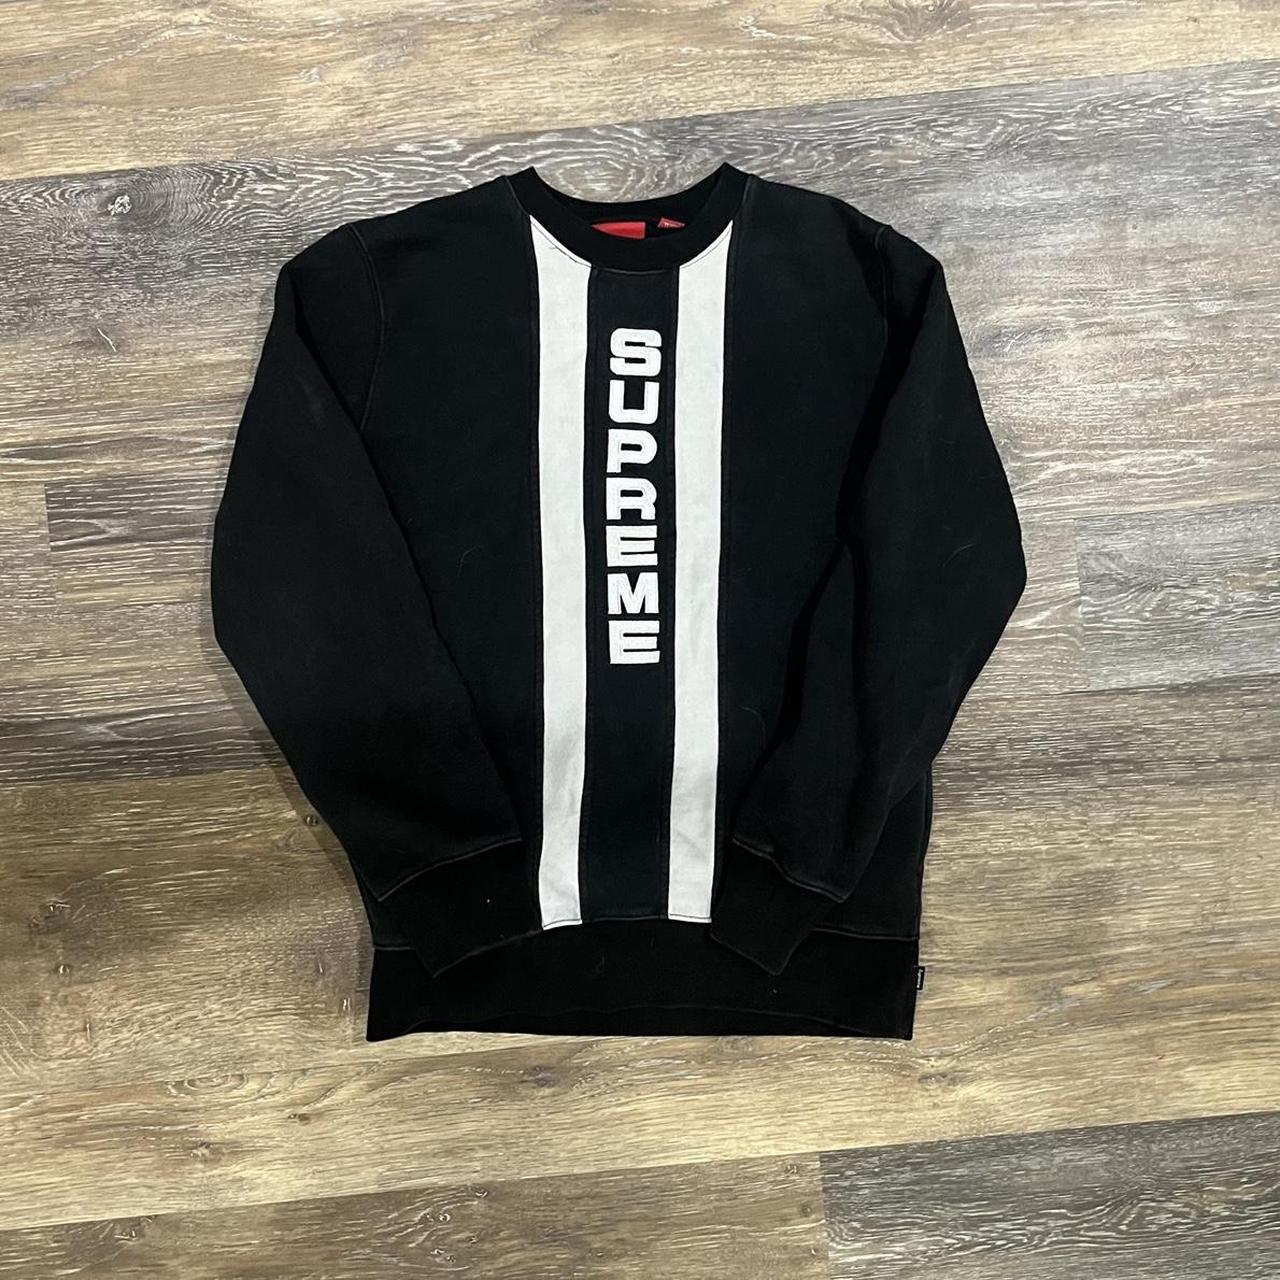 Black and White, SUPREME crewneck. It is a little...